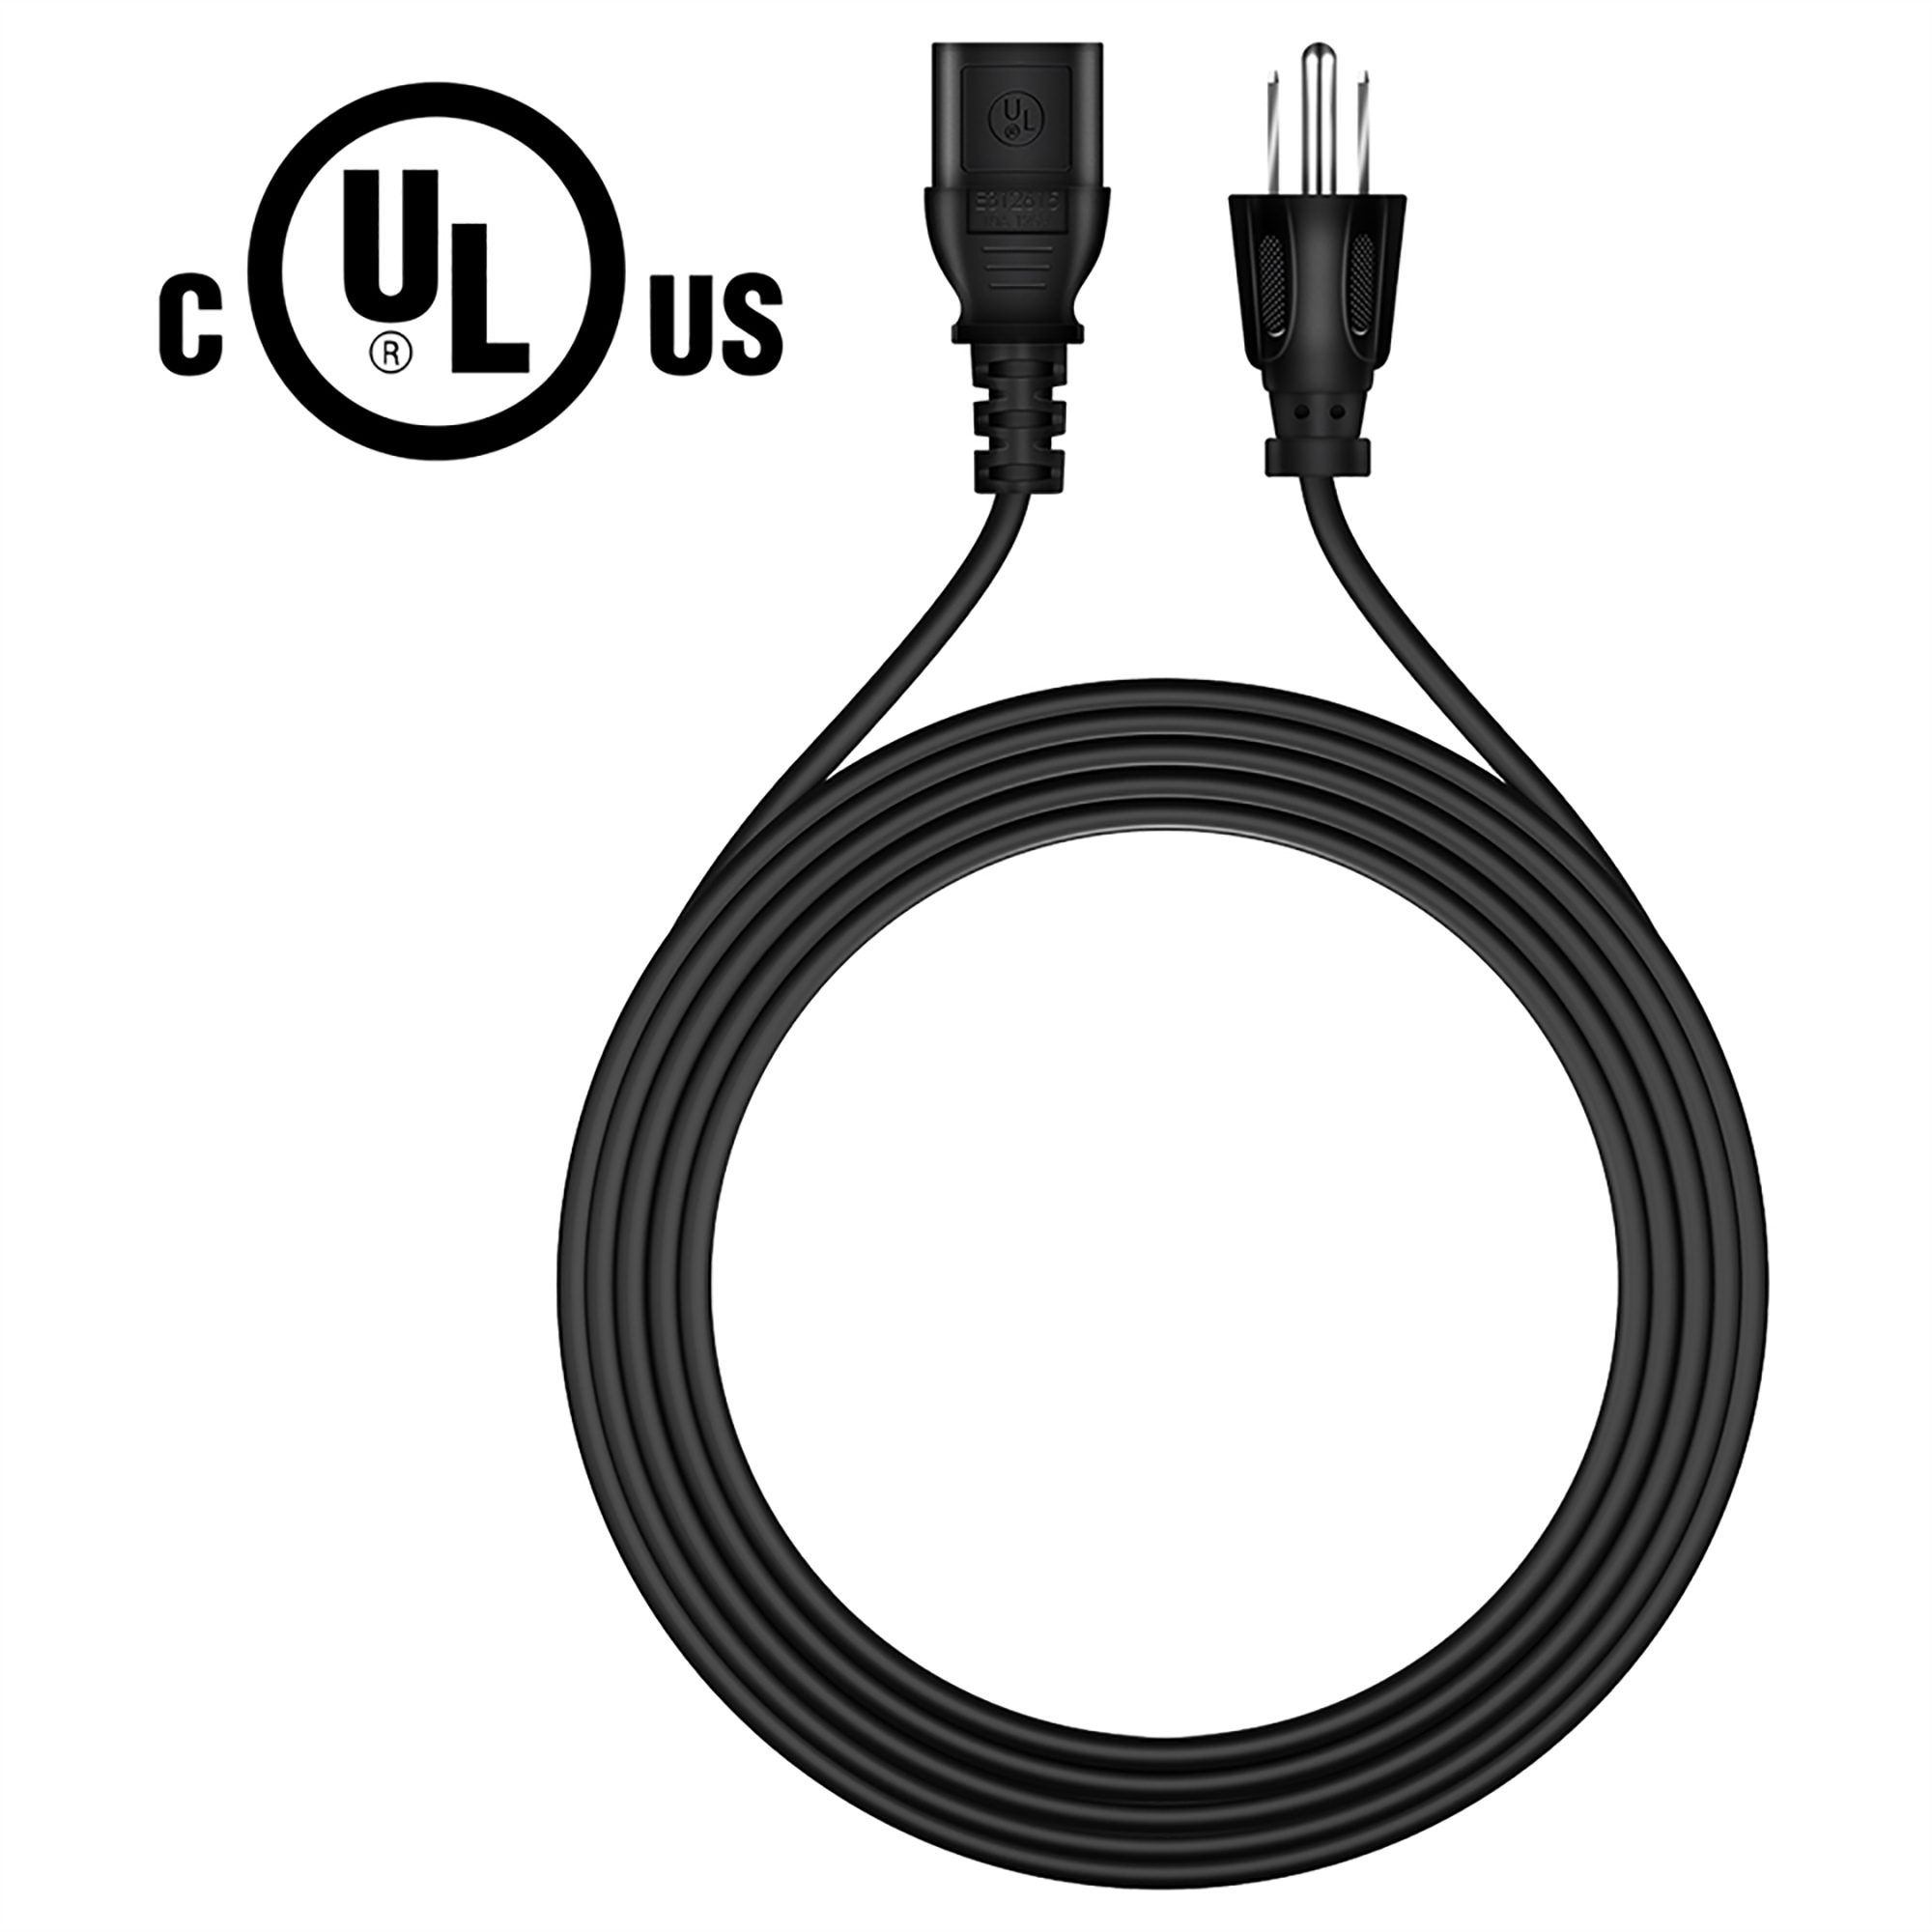 PKPOWER 6ft AC Power Cable Charger Cord for JBL EON615 15" Powered DJ PA Loud Speakers" - image 3 of 5